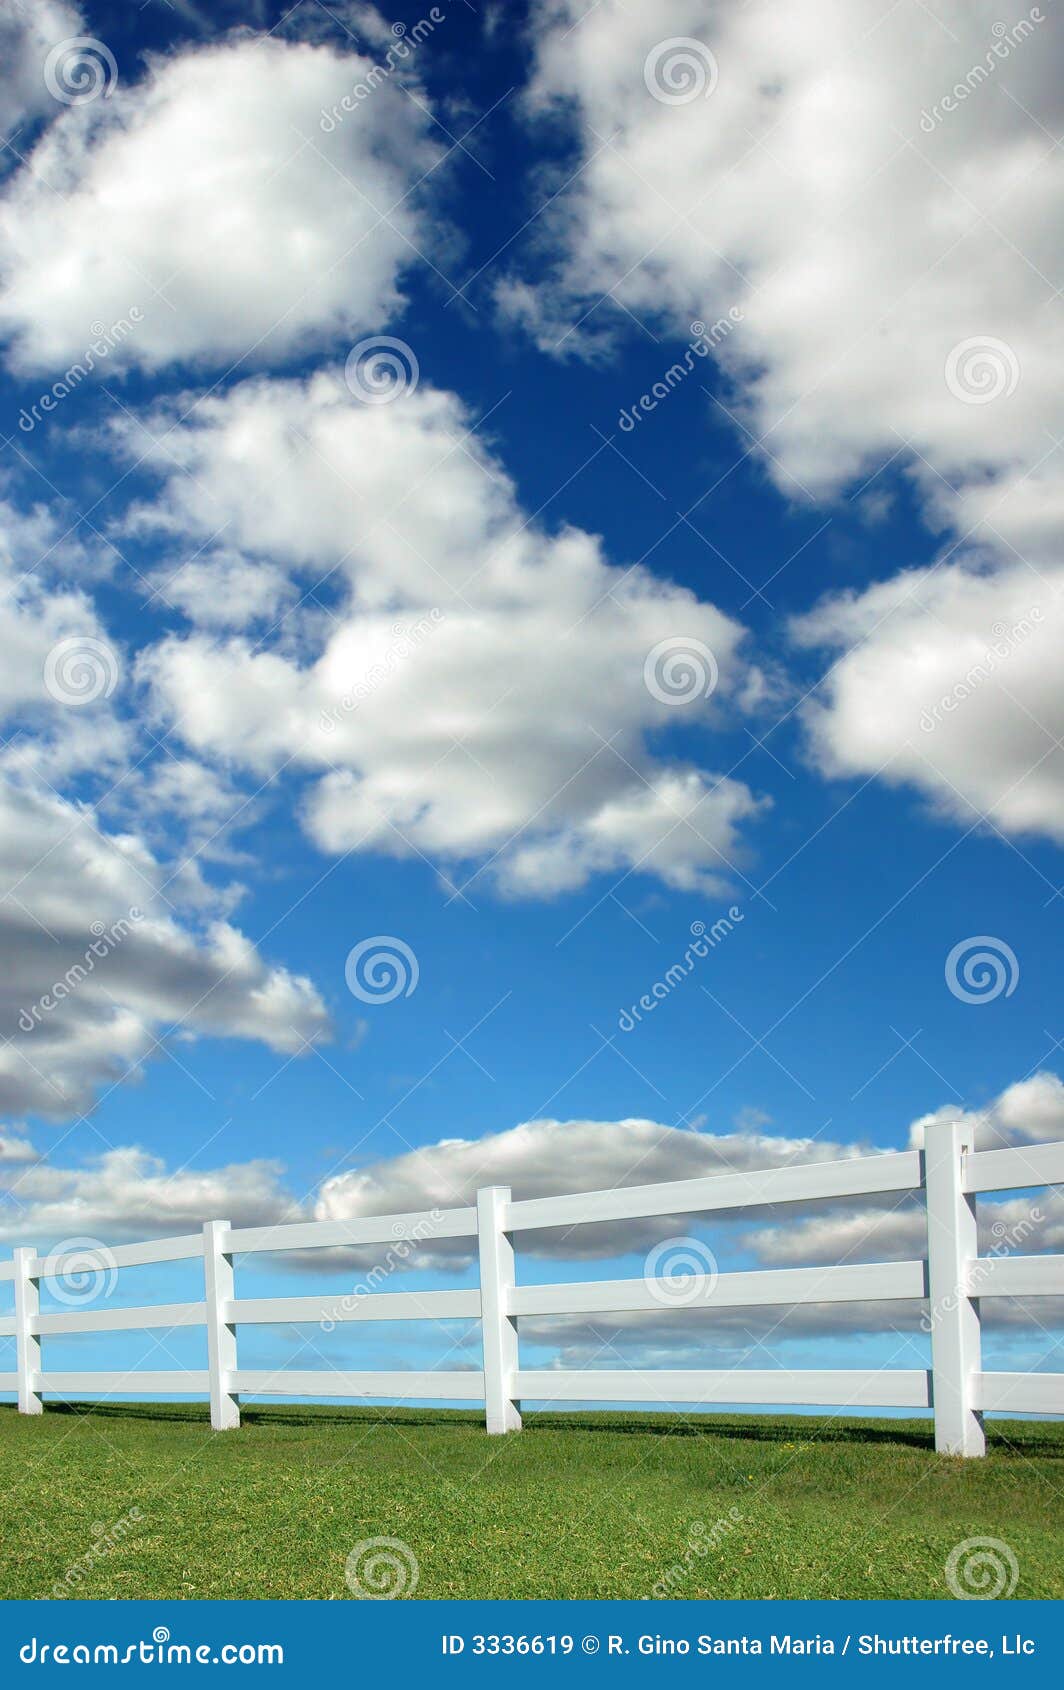 Lanscape With Fence. Bright landscape with white fence